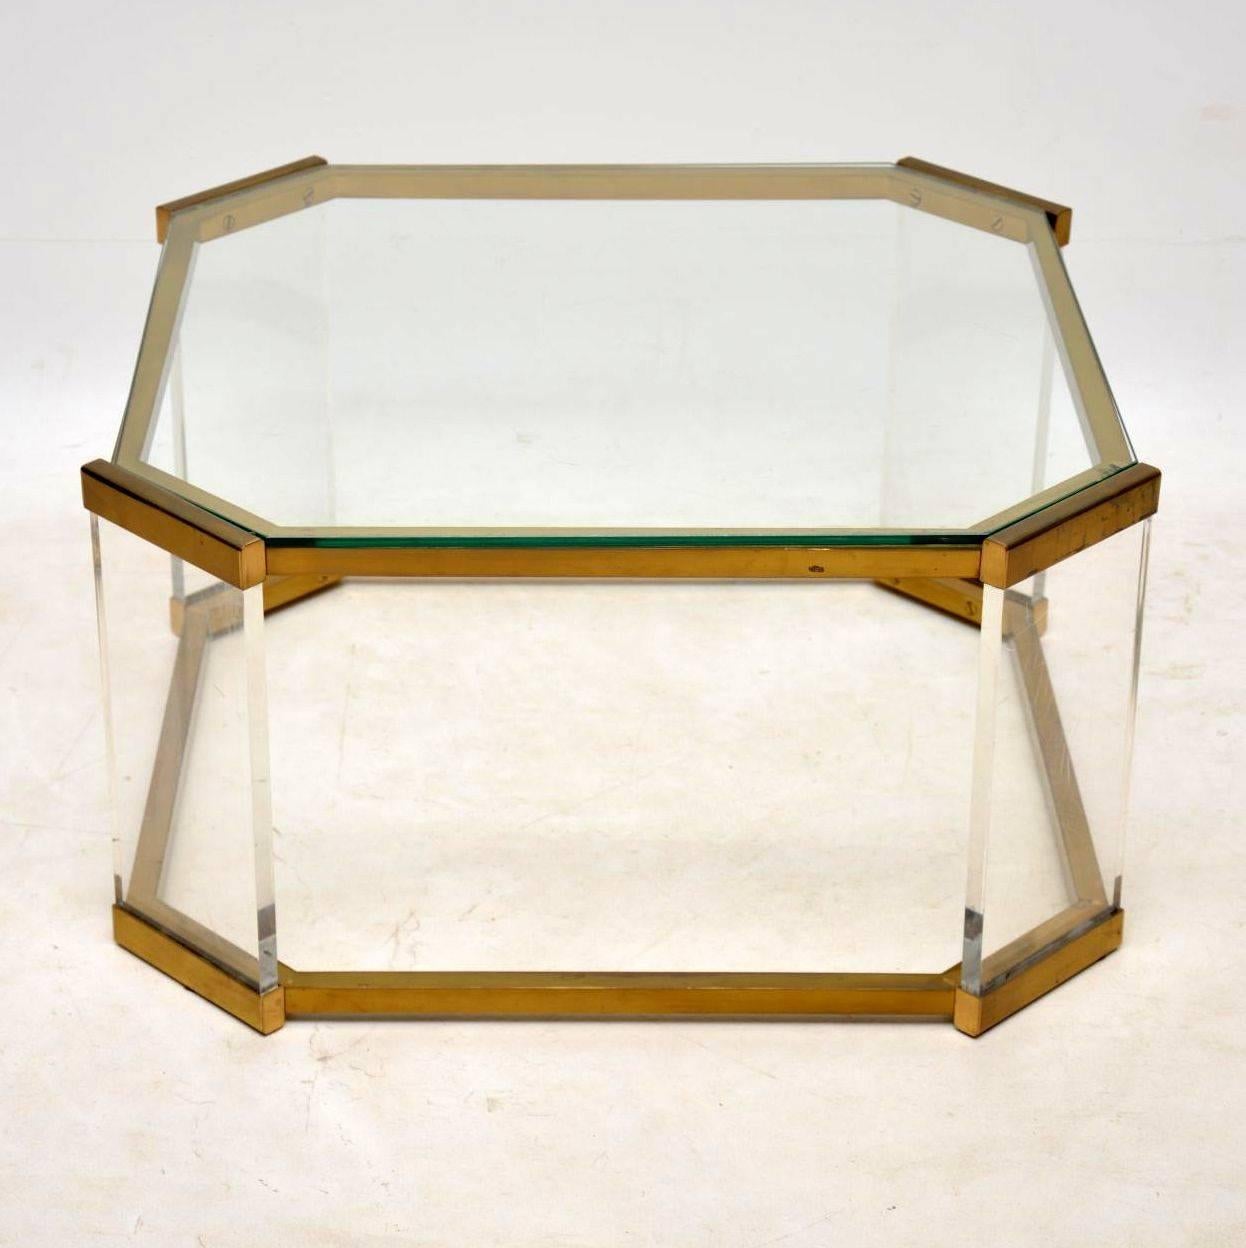 A stunning vintage coffee table made from Perspex and brass, with an inset glass top. This has a beautiful design, is very well made and is in lovely vintage condition. It’s clean, sturdy and sound, the brass has nice patina and the Perspex has only